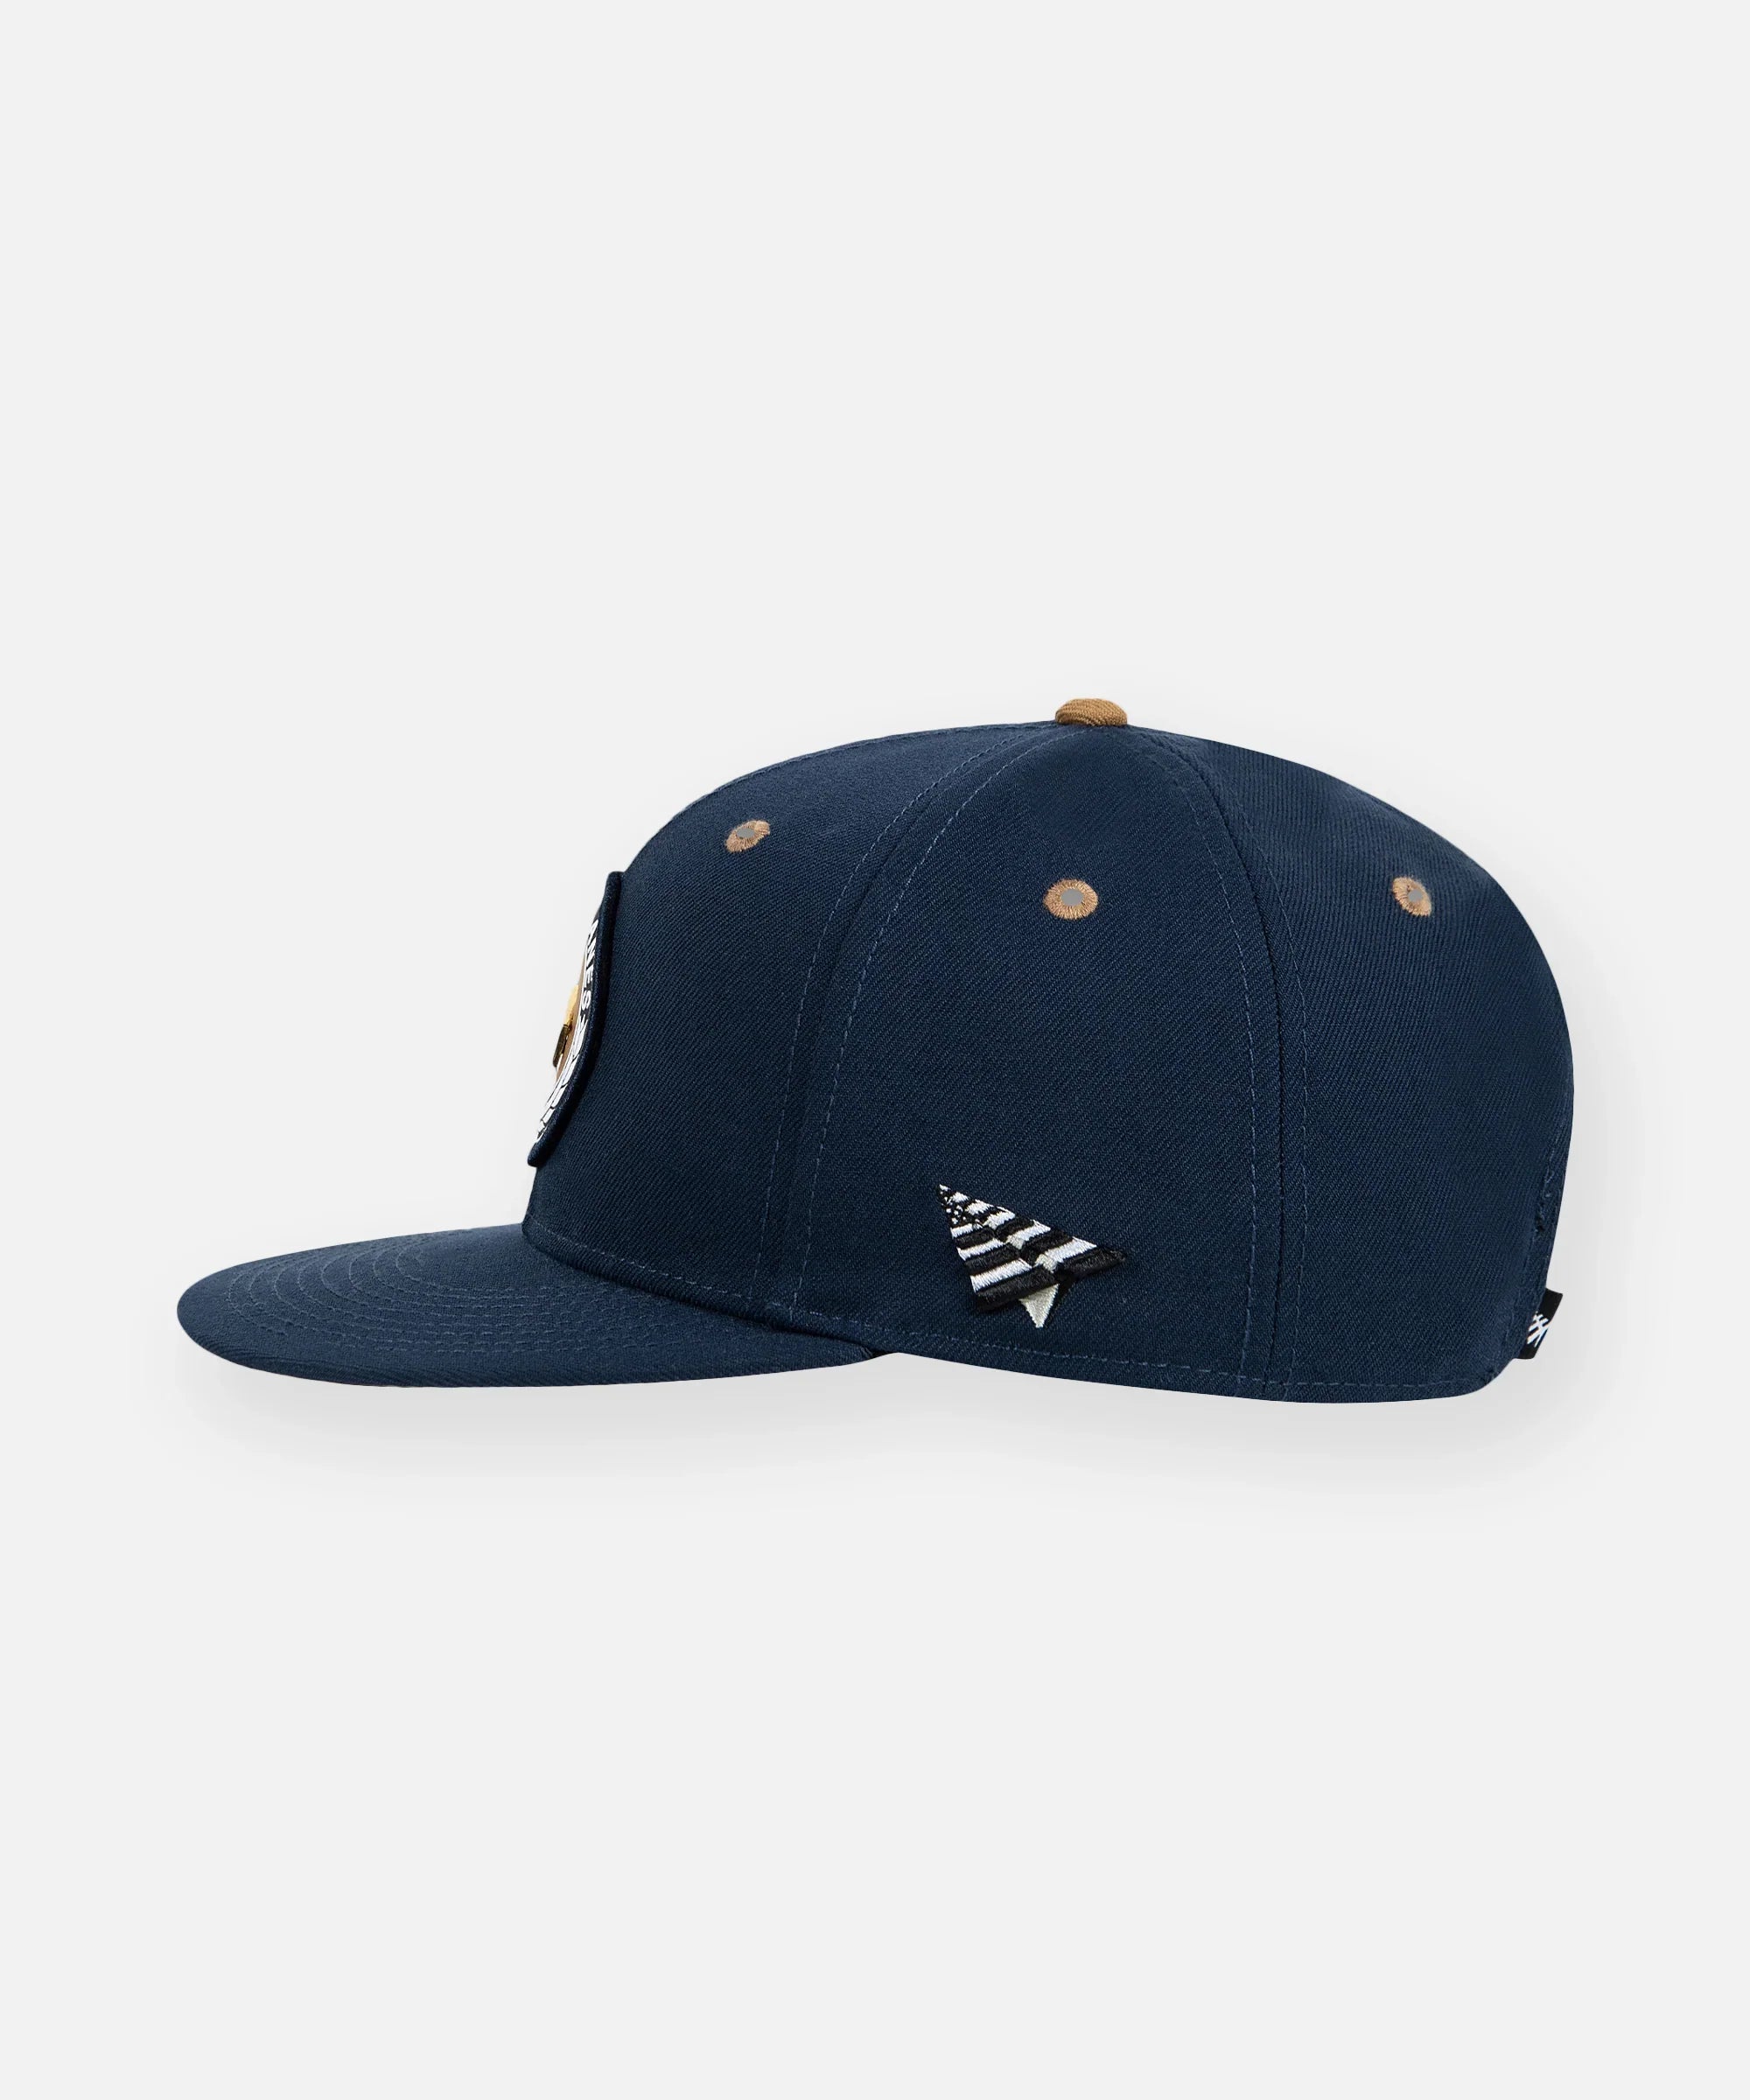 PAPER PLANES FIRST CLASS 2.0 9FIFTY SNAPBACK - Gravity NYC